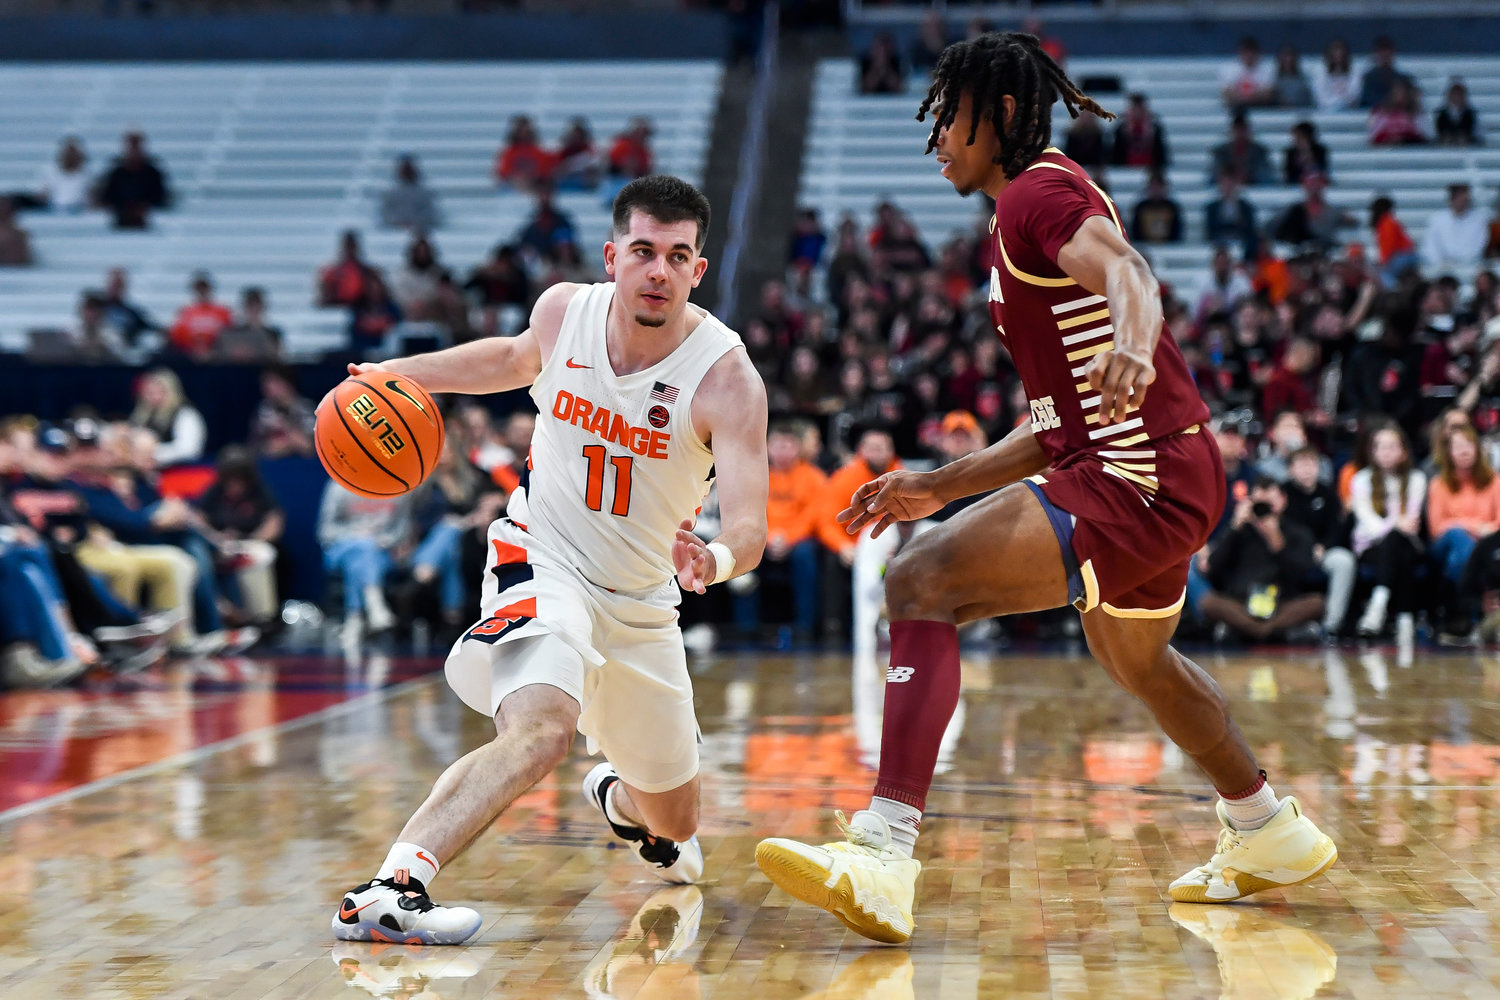 Syracuse guard Joe Girard, left, is defended by Boston College guard DeMarr Langford Jr. during the first half of Saturday's game in Syracuse. Girard scored 24 points at the Orange won 79-65.